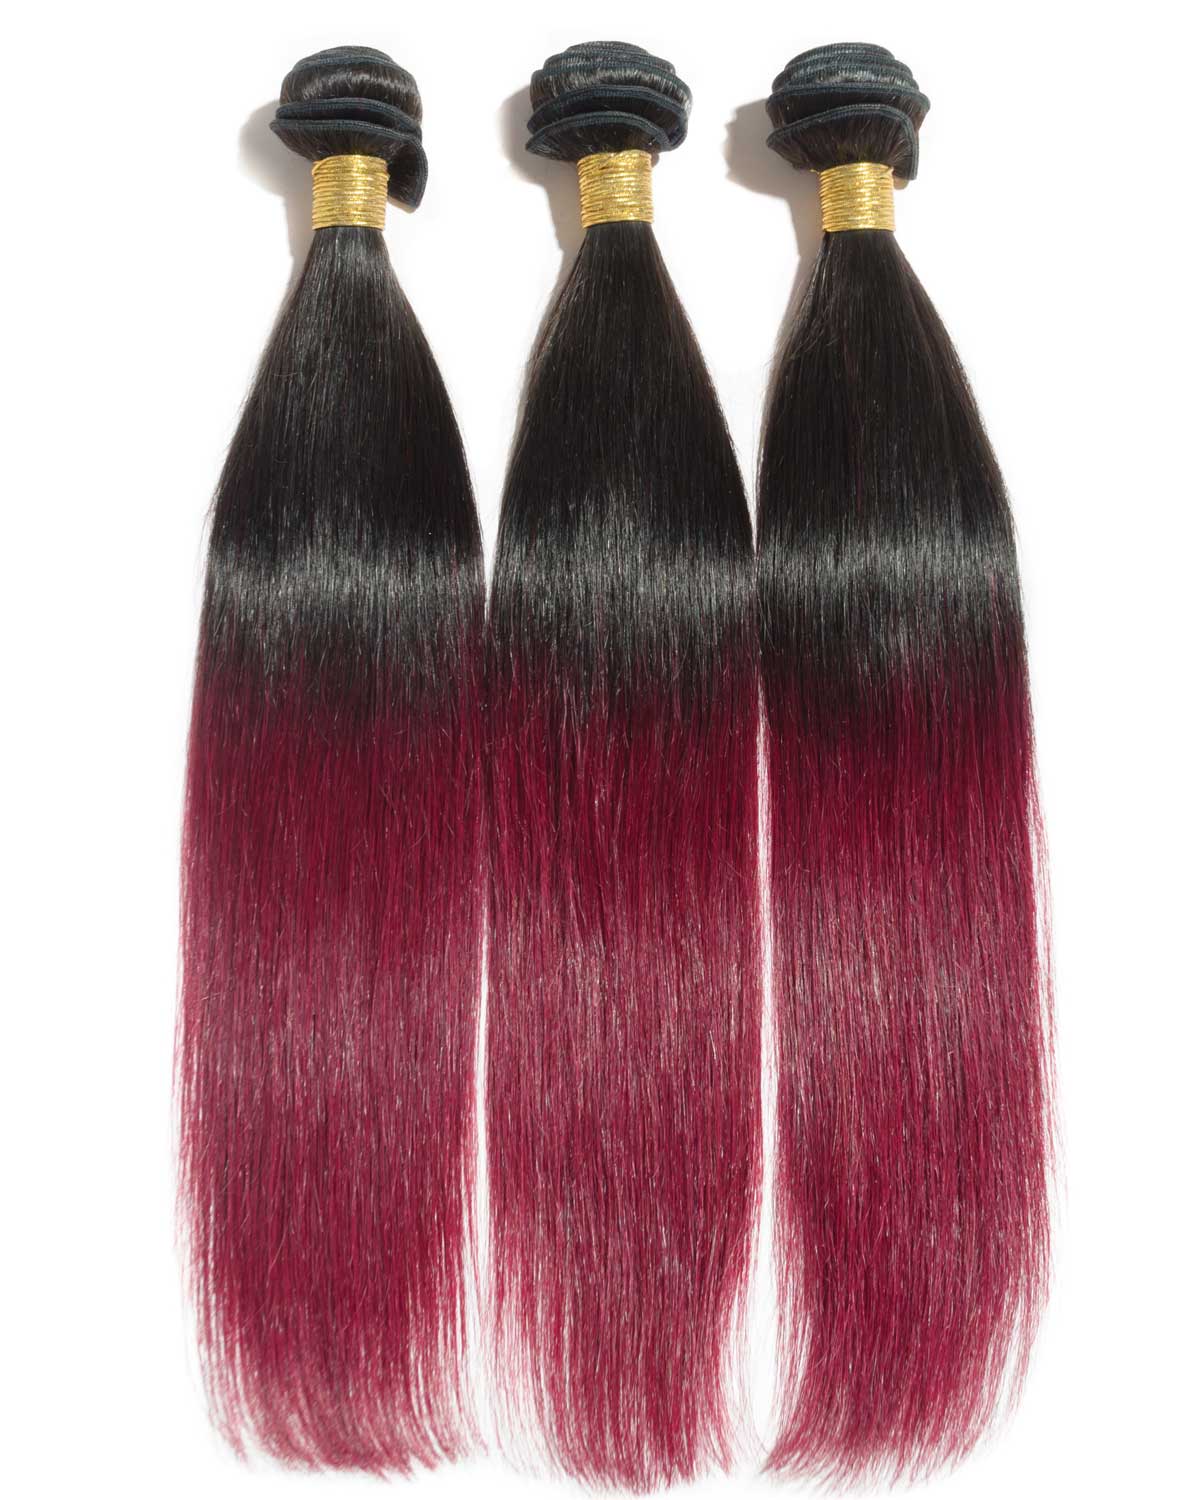 Ombré Colored Remy Machine Weft Hair Extensions